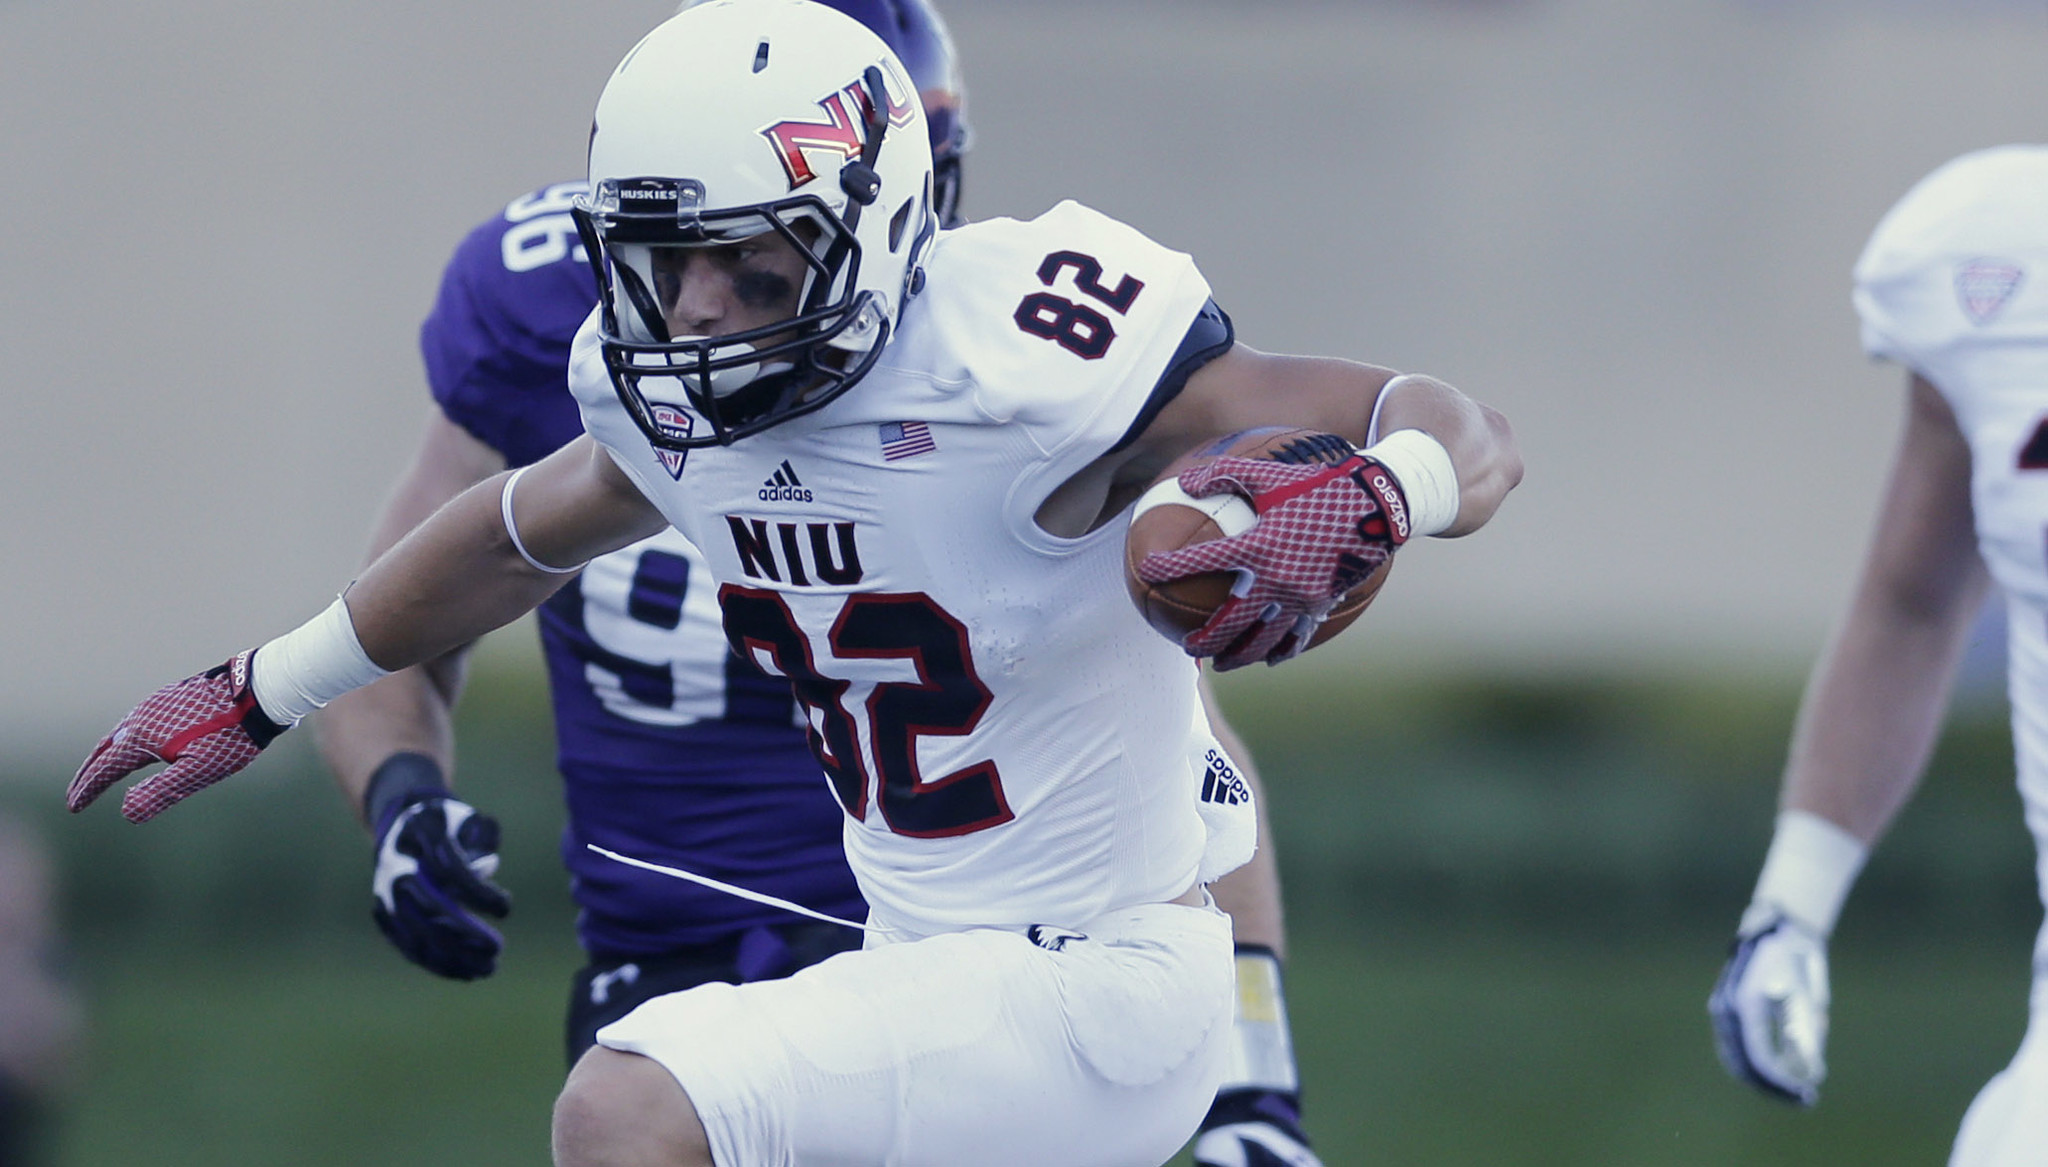 NIU receiver Chad Beebe back from injury, inspired by father's unlikely path - Chicago ...